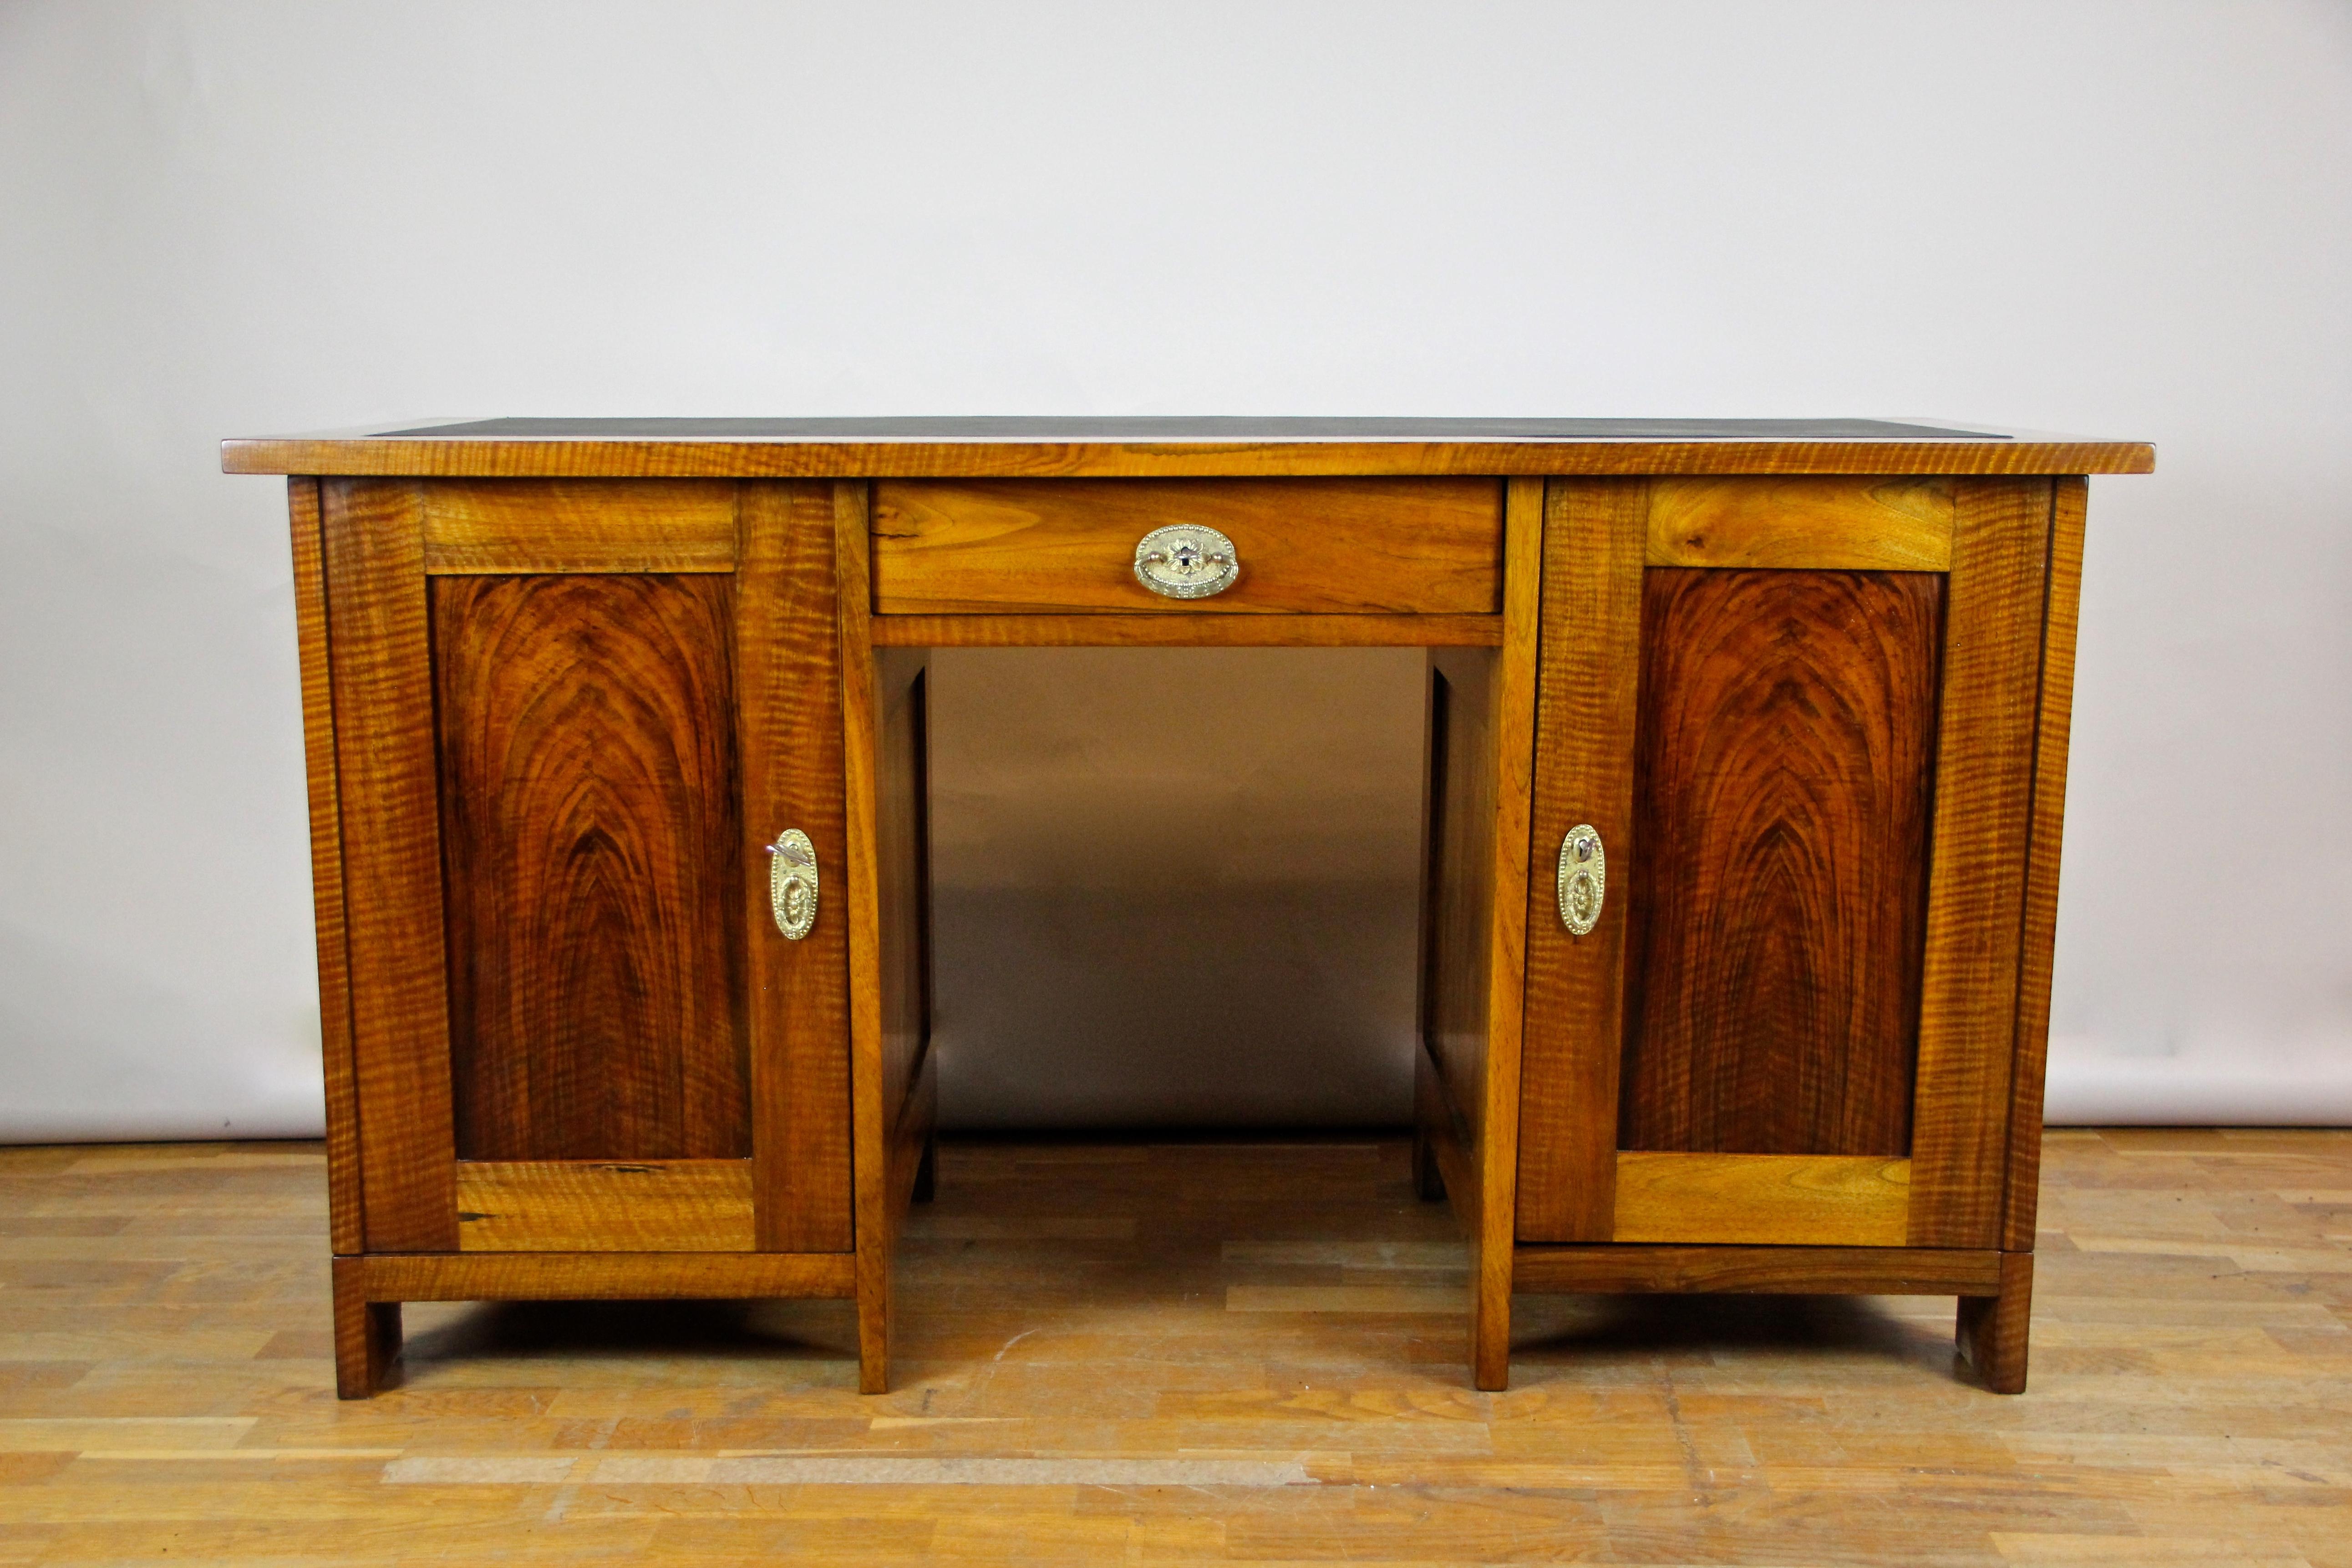 This straight shaped Art Nouveau writing desk comes from Austria circa 1900 and has a compact but very handsome appearance. The rectangular corpus is adorned by great arranged nut wood veneer. Featuring a drawer at the top and two compartments, this